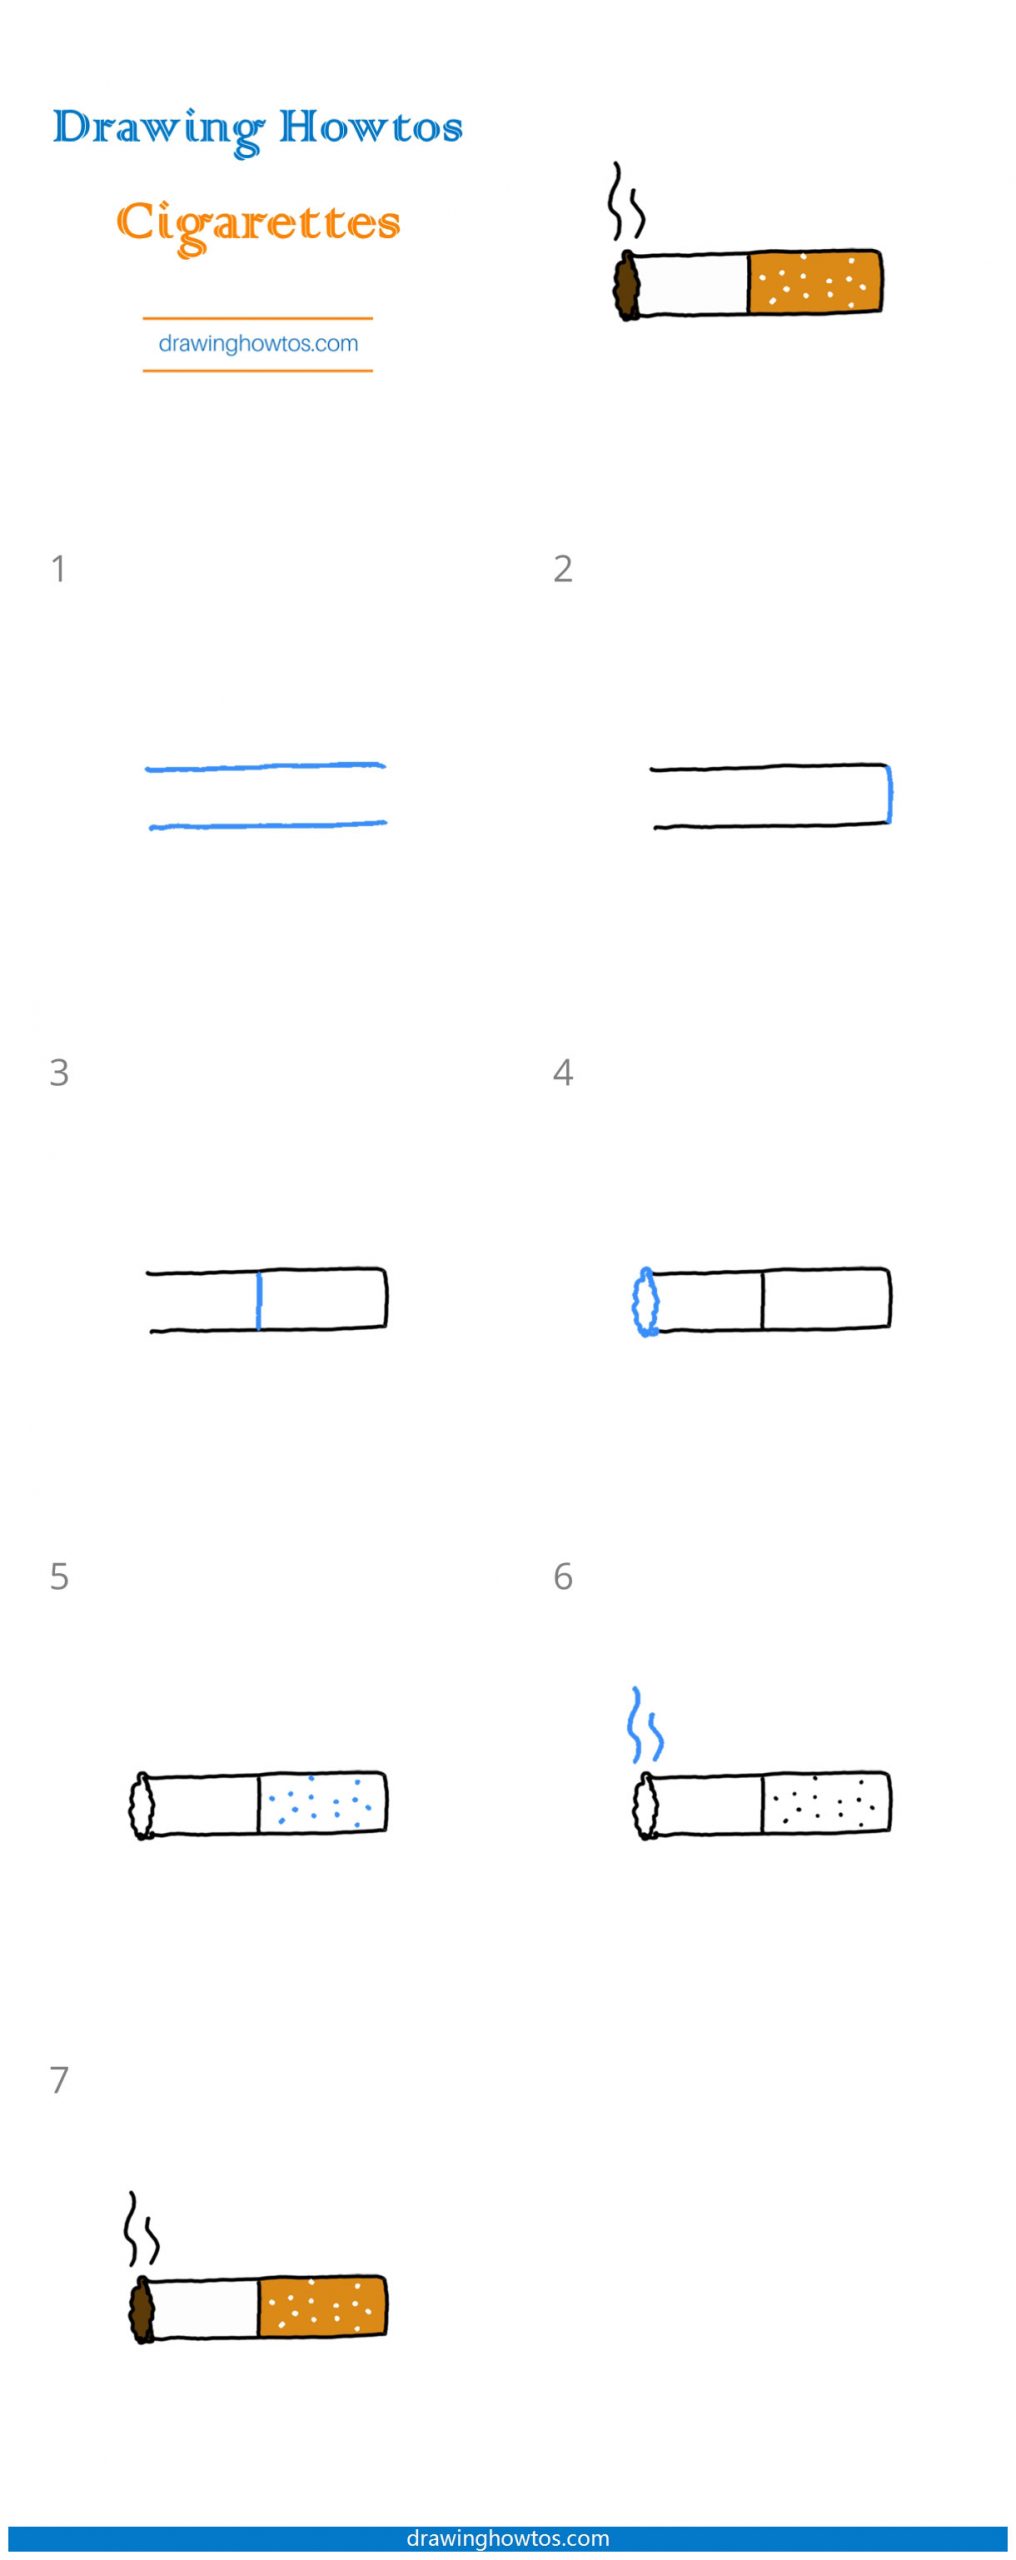 How to Draw a Cigarette Step by Step